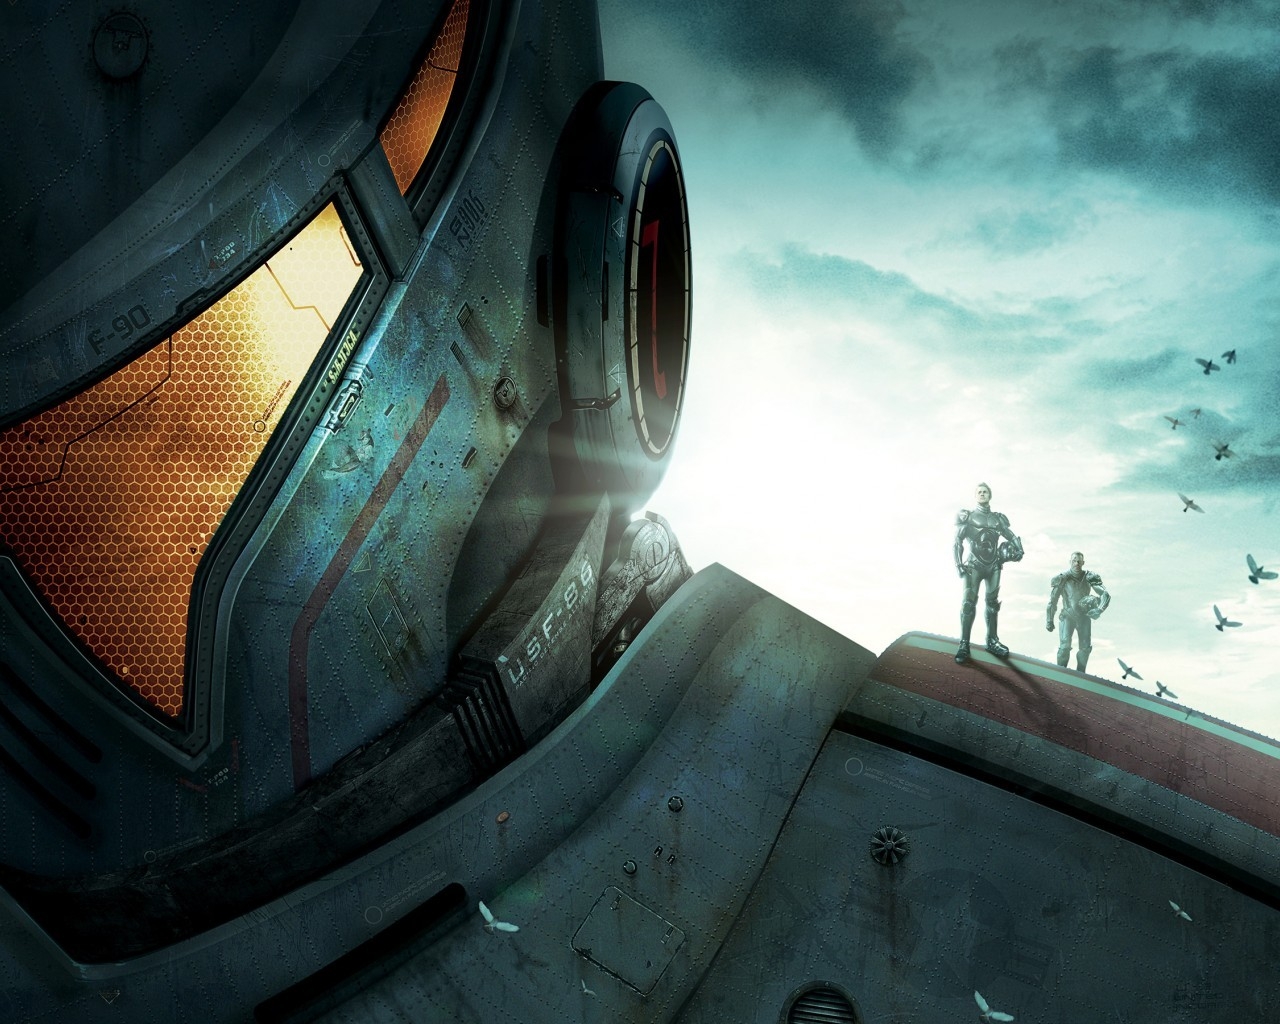 Pacific Rim Film Poster for 1280 x 1024 resolution